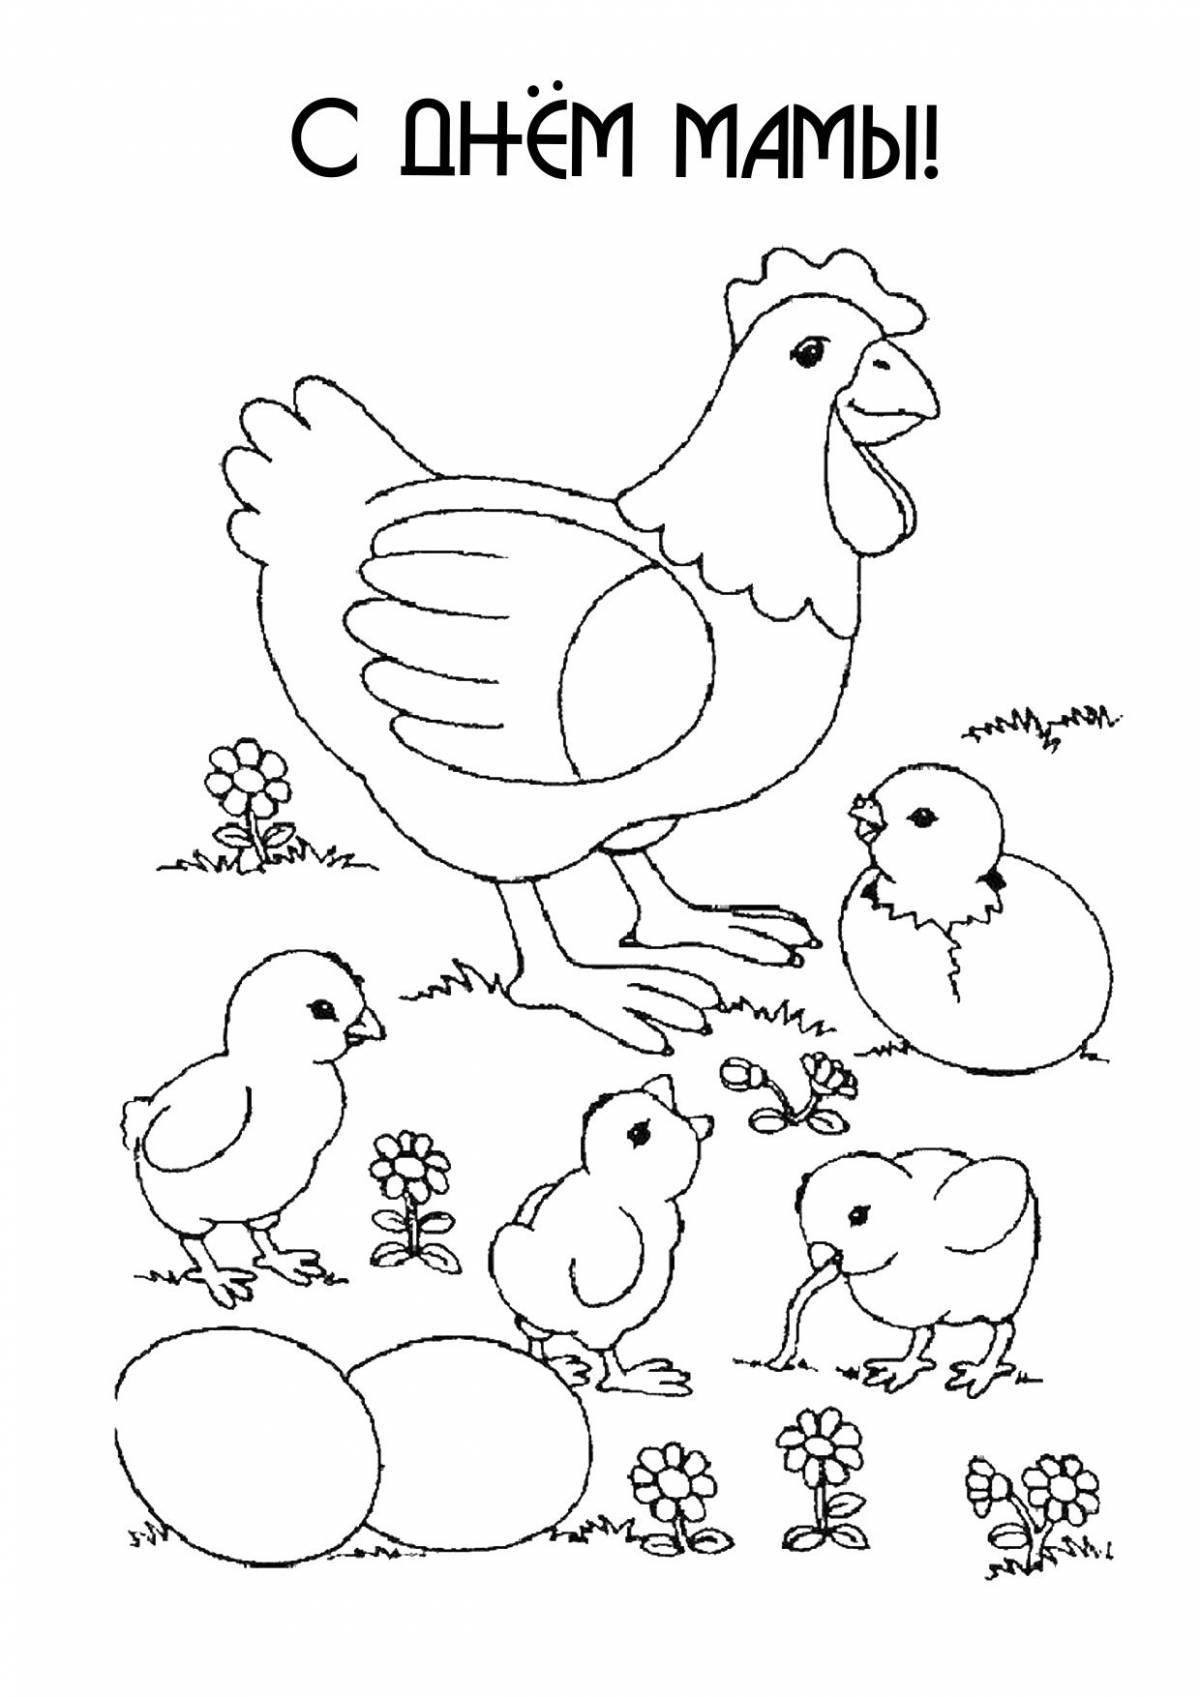 Fun balapan coloring book for the little ones